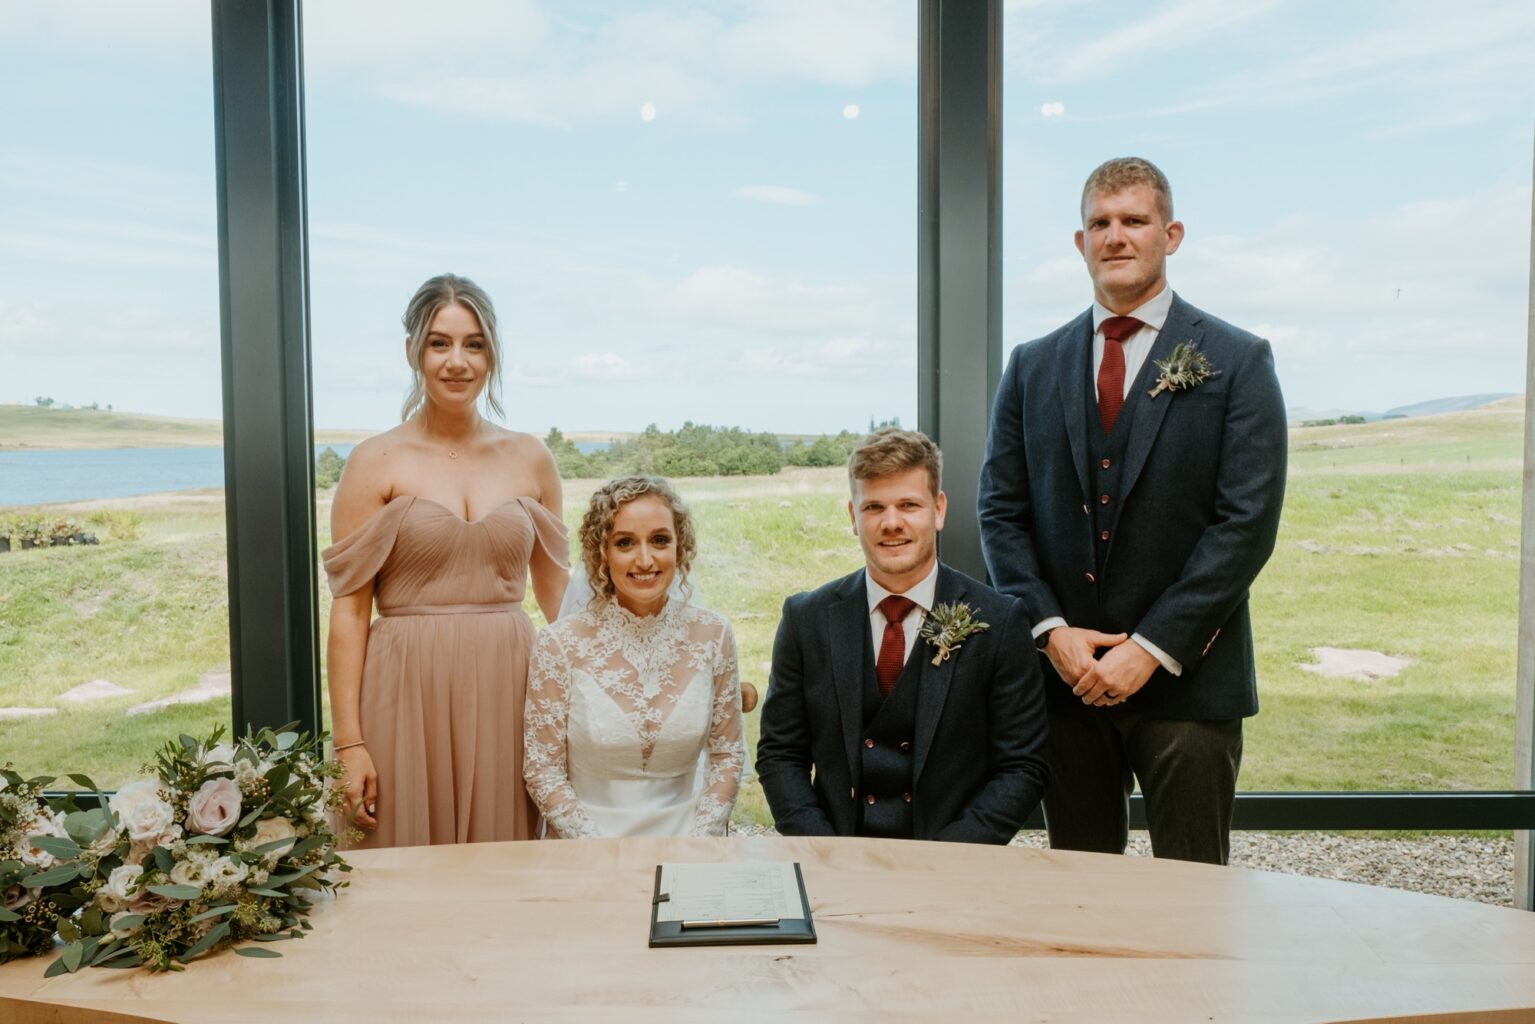 bride and groom sitting at table with best man and bridemaid standing behind them big glass window behind them showing view of fields and loch cairns farm estate wedding